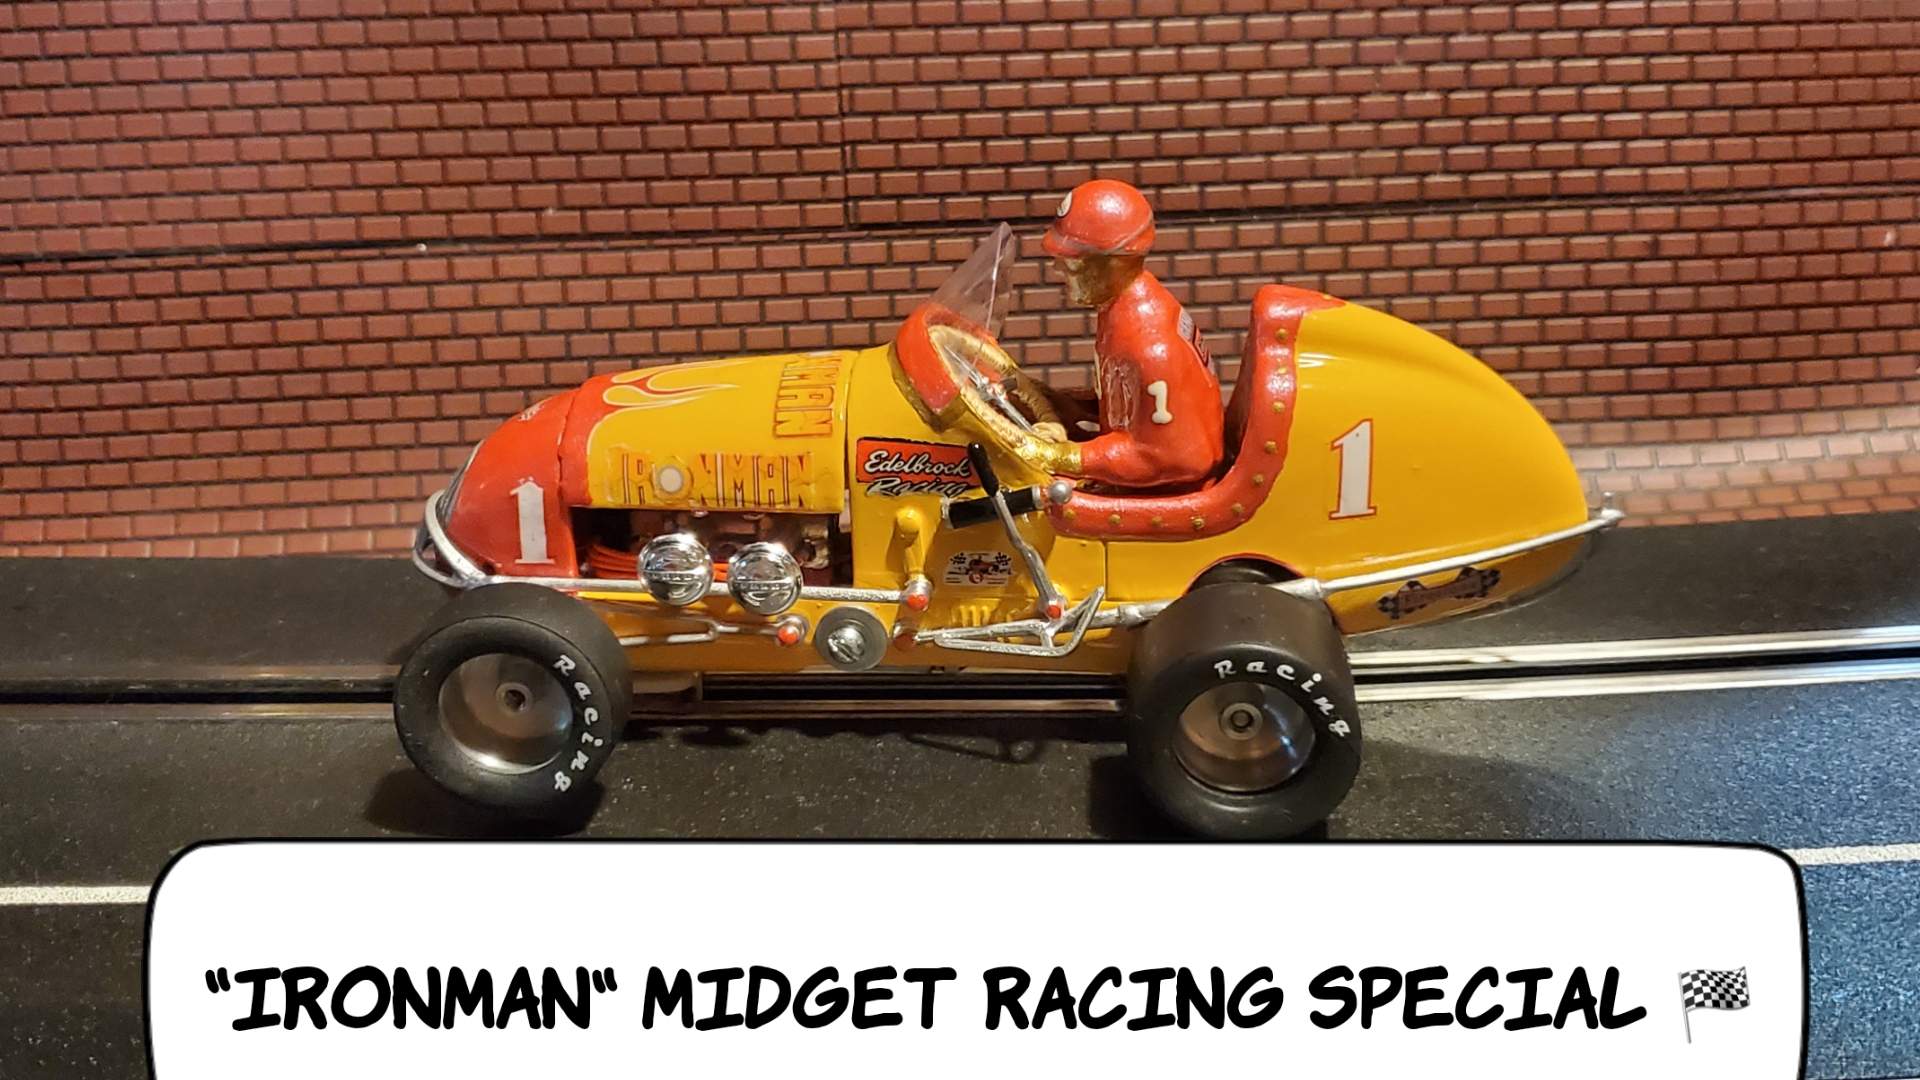 * THIS WEEKEND ONLY * Black Friday Super Sale, Save $125 off our Ebay $349.99 Store Sale Price * Monogram Midget Racer “IronMan” Racing Special 1/24 Scale Slot Car 8